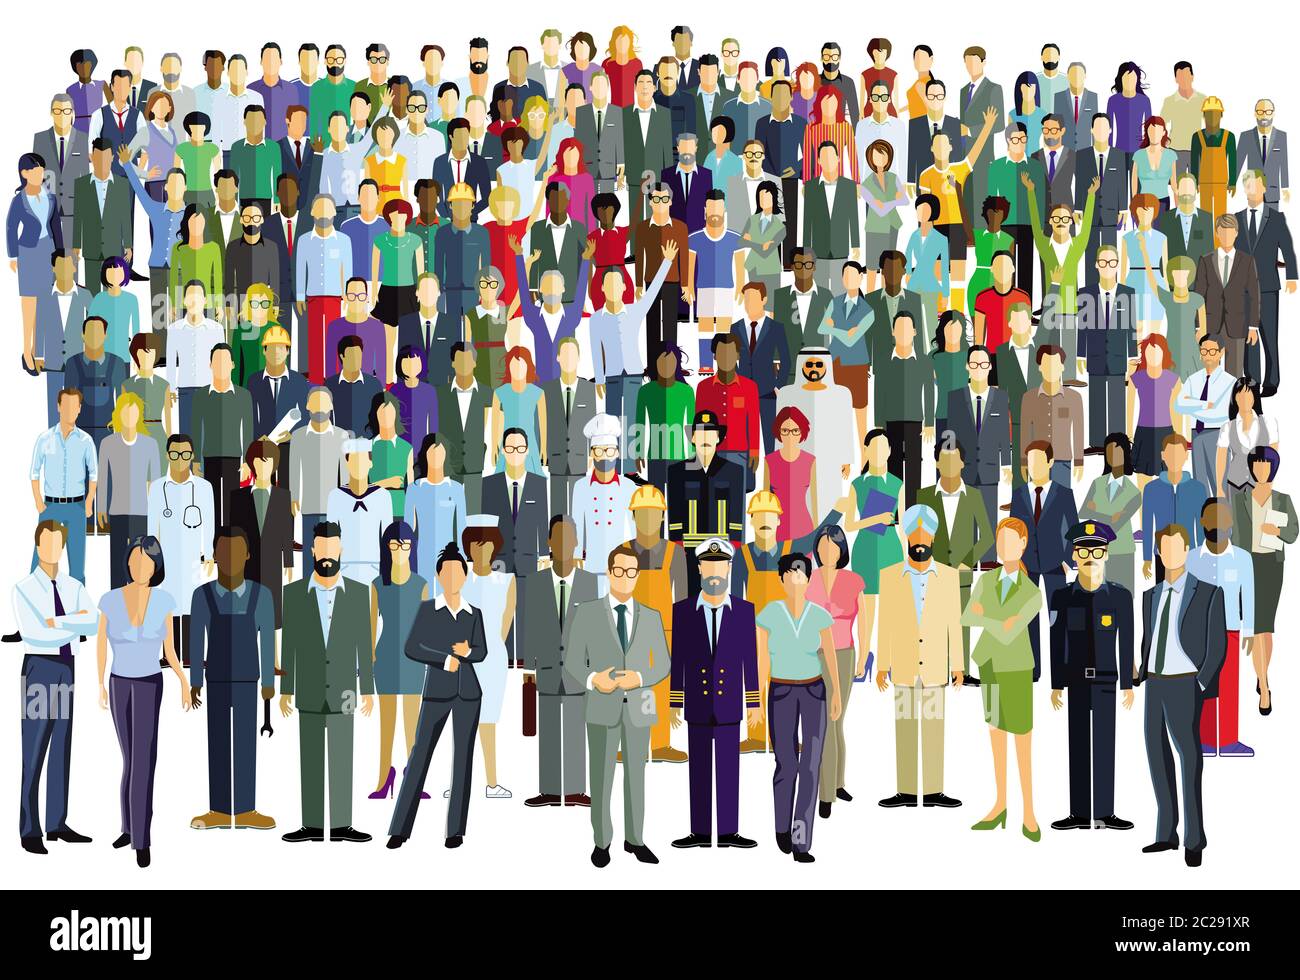 Crowd in the community, coworkers and friends Stock Photo